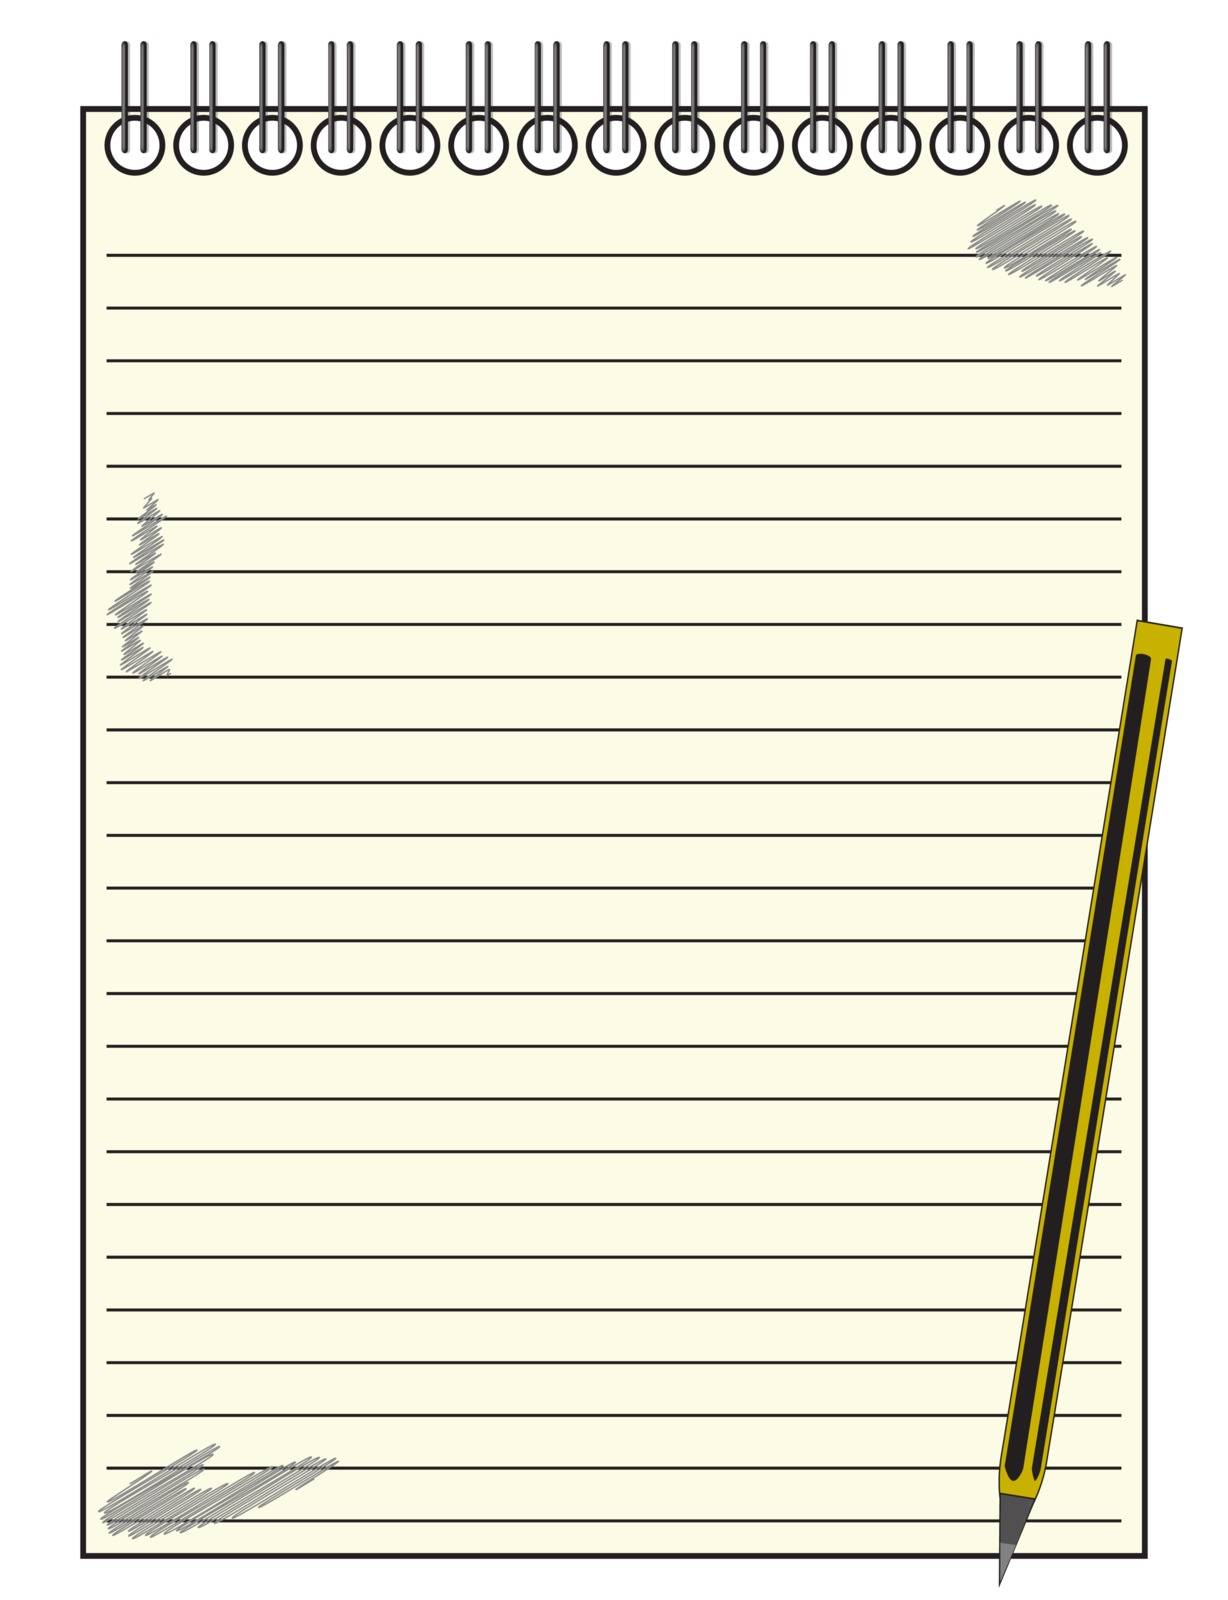 Lined Reporter Notepad With Pencil by DavidScar